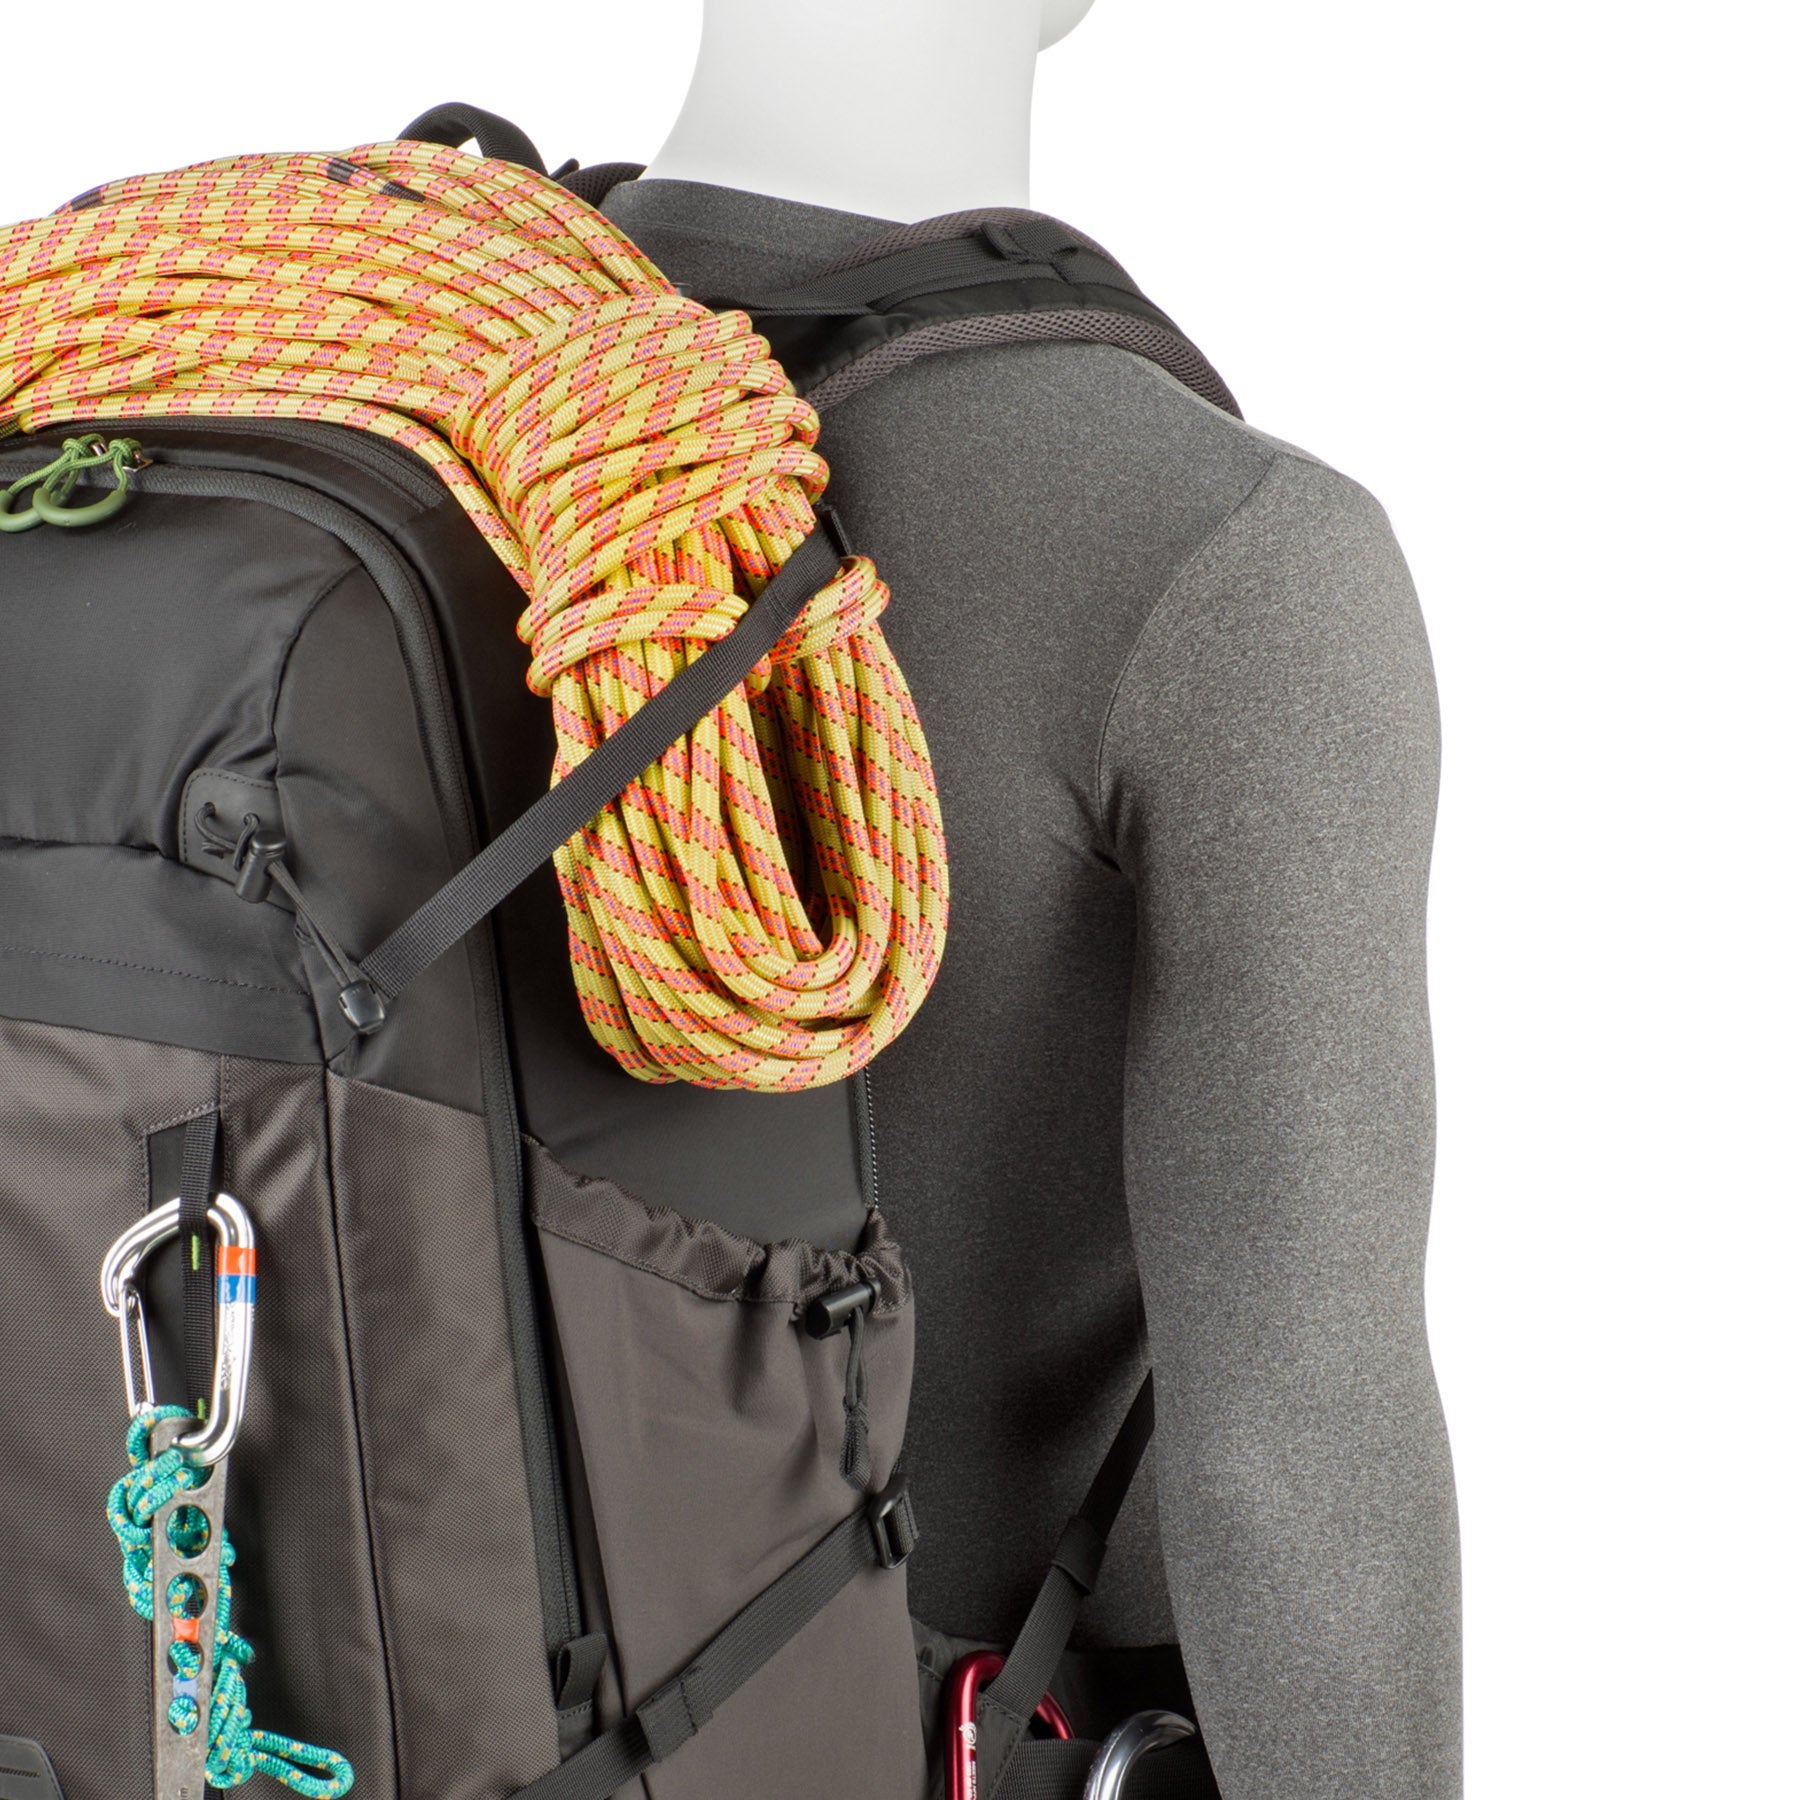 Daisy chain, ice axe loops and additional lash points for expanding your carry capacity